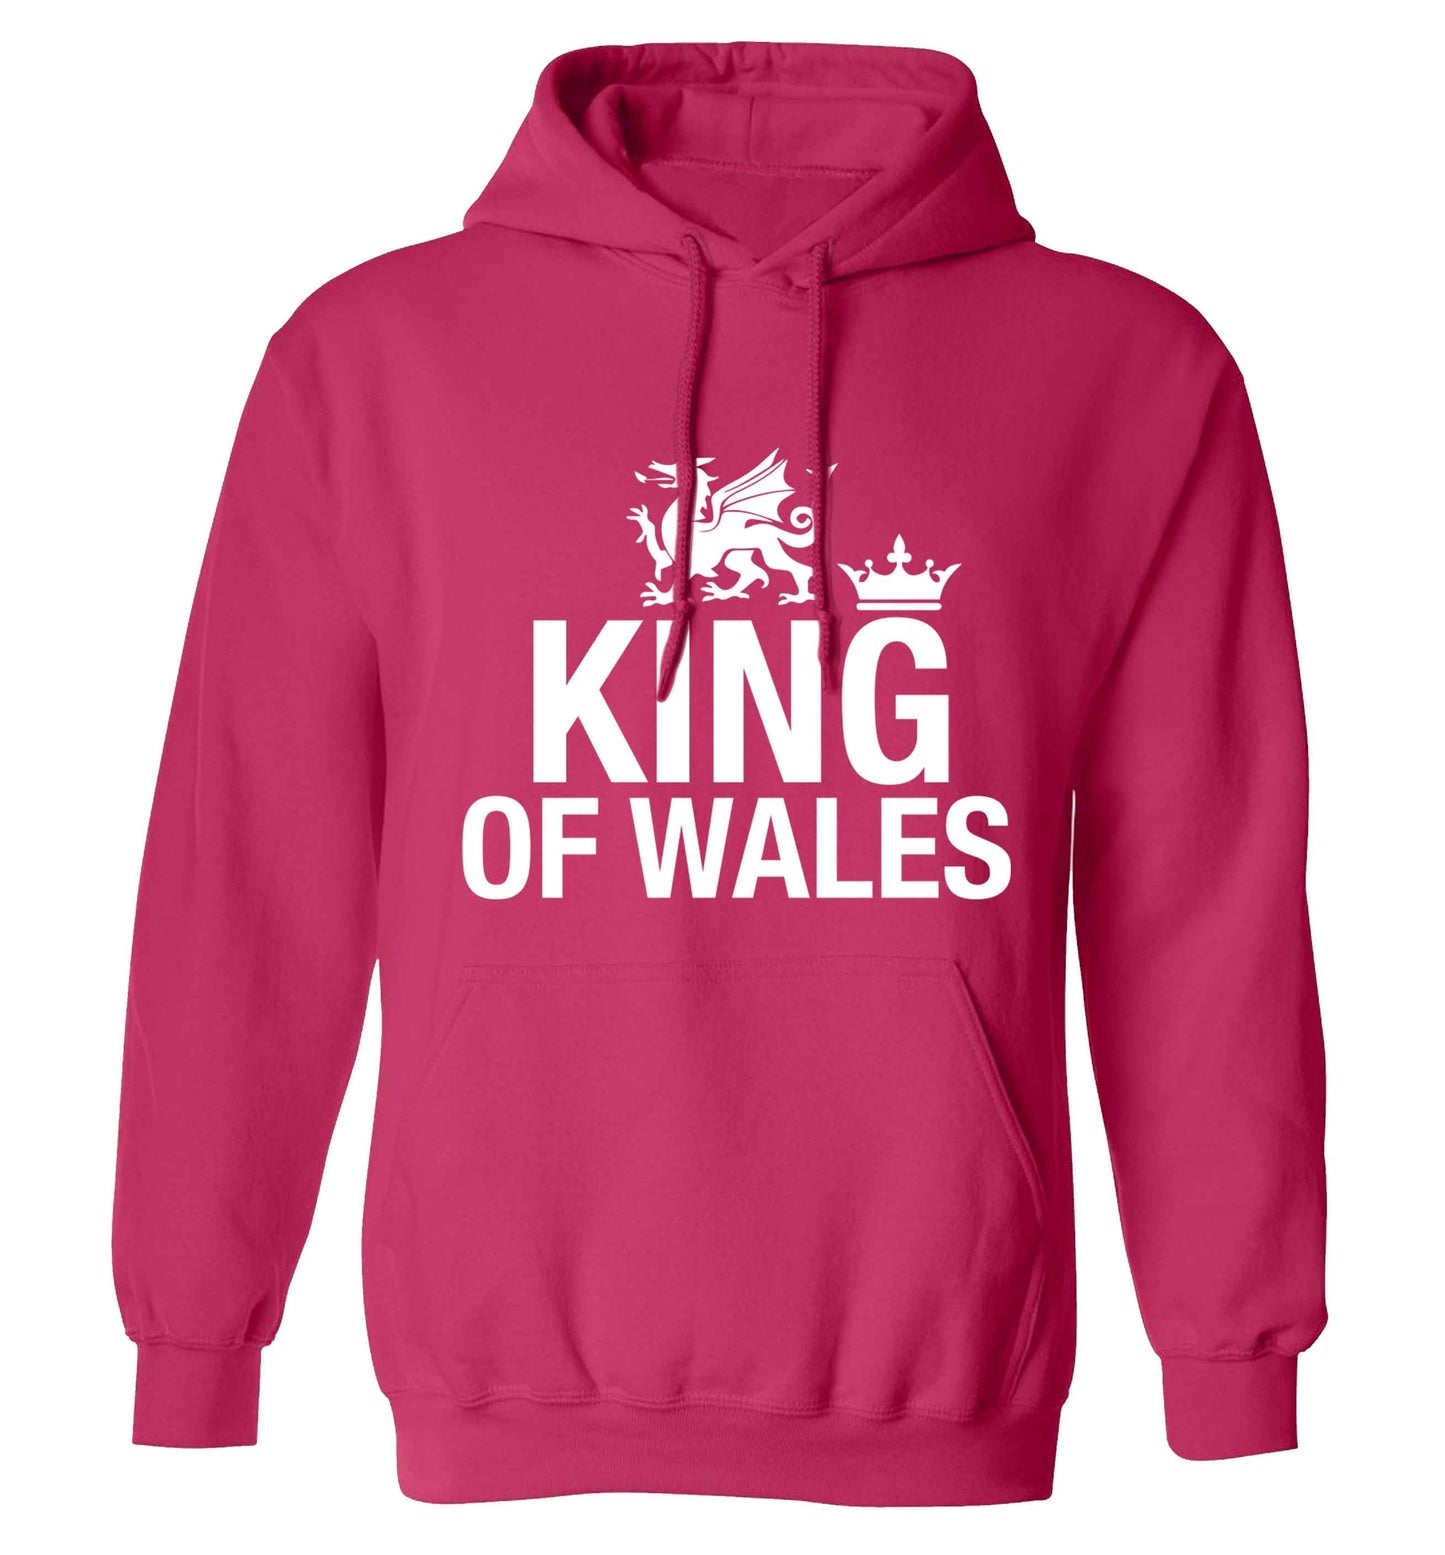 King of Wales adults unisex pink hoodie 2XL